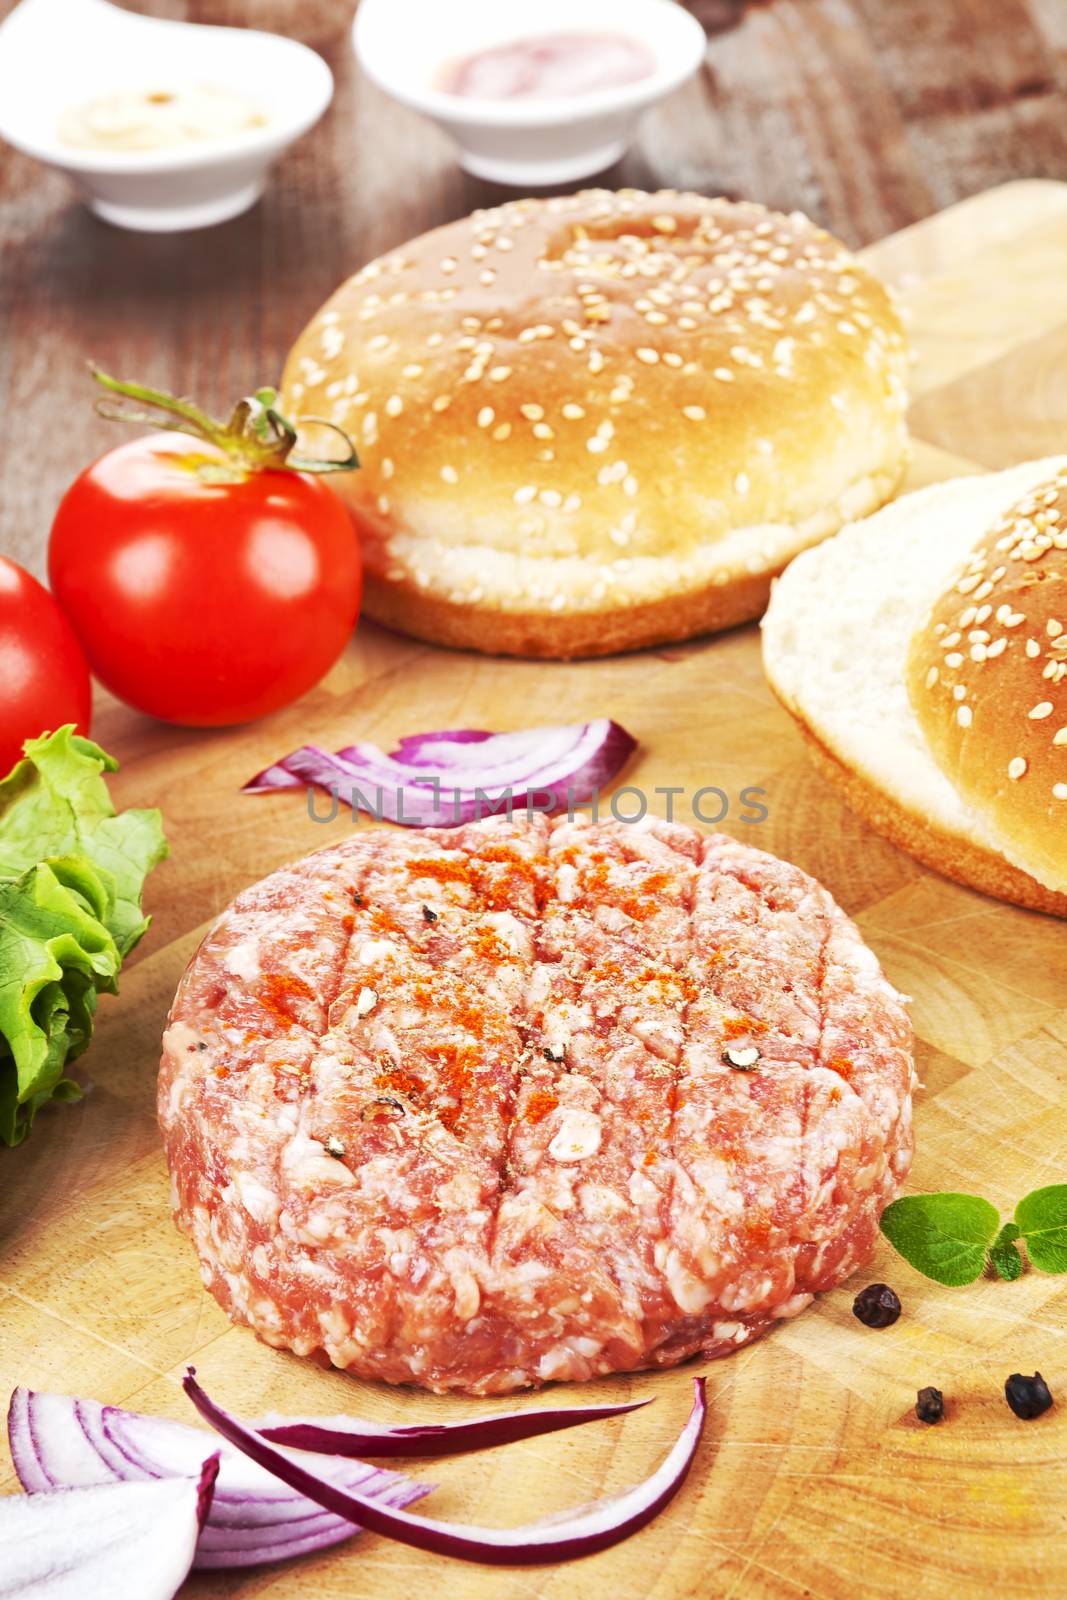 Minced meet prepared for hamburger with bun, tomato, lettuce, mustard and ketchup in background. 